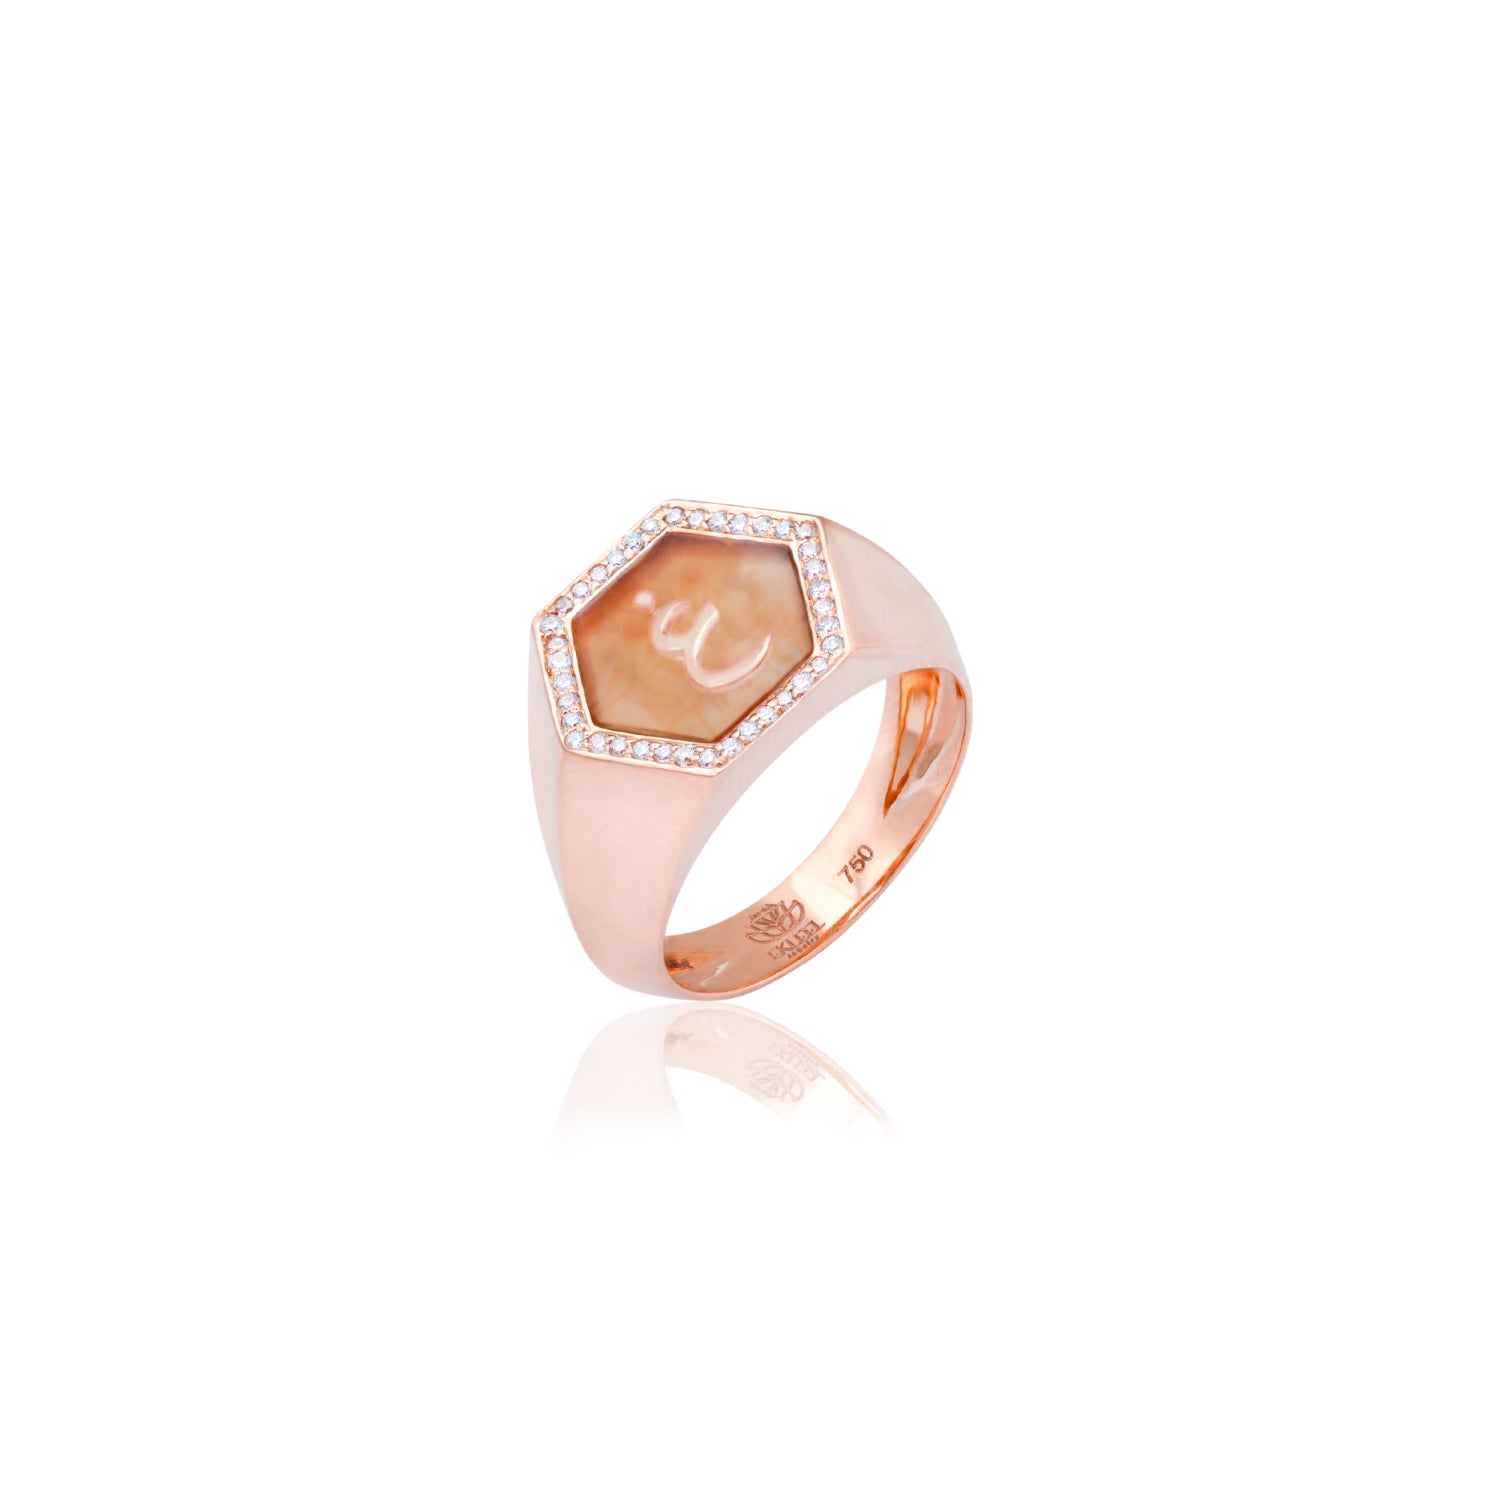 Qamoos 2.0 Letter غ Carnelian and Diamond Signet Ring in Rose Gold